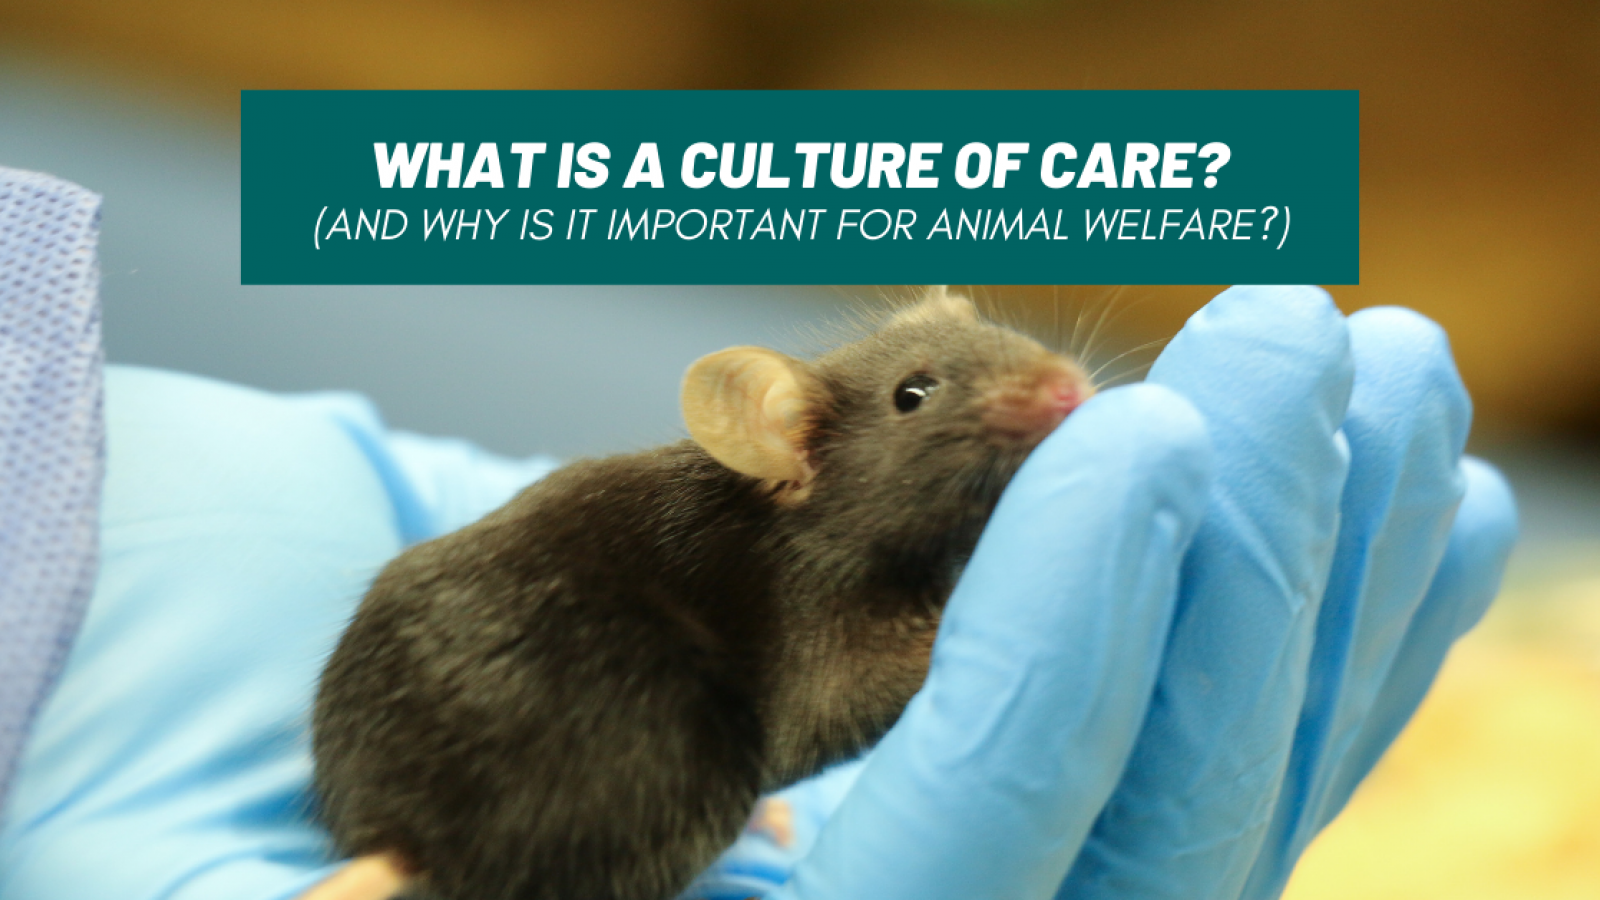 What exactly is a culture of care? And why is it important for animal welfare?